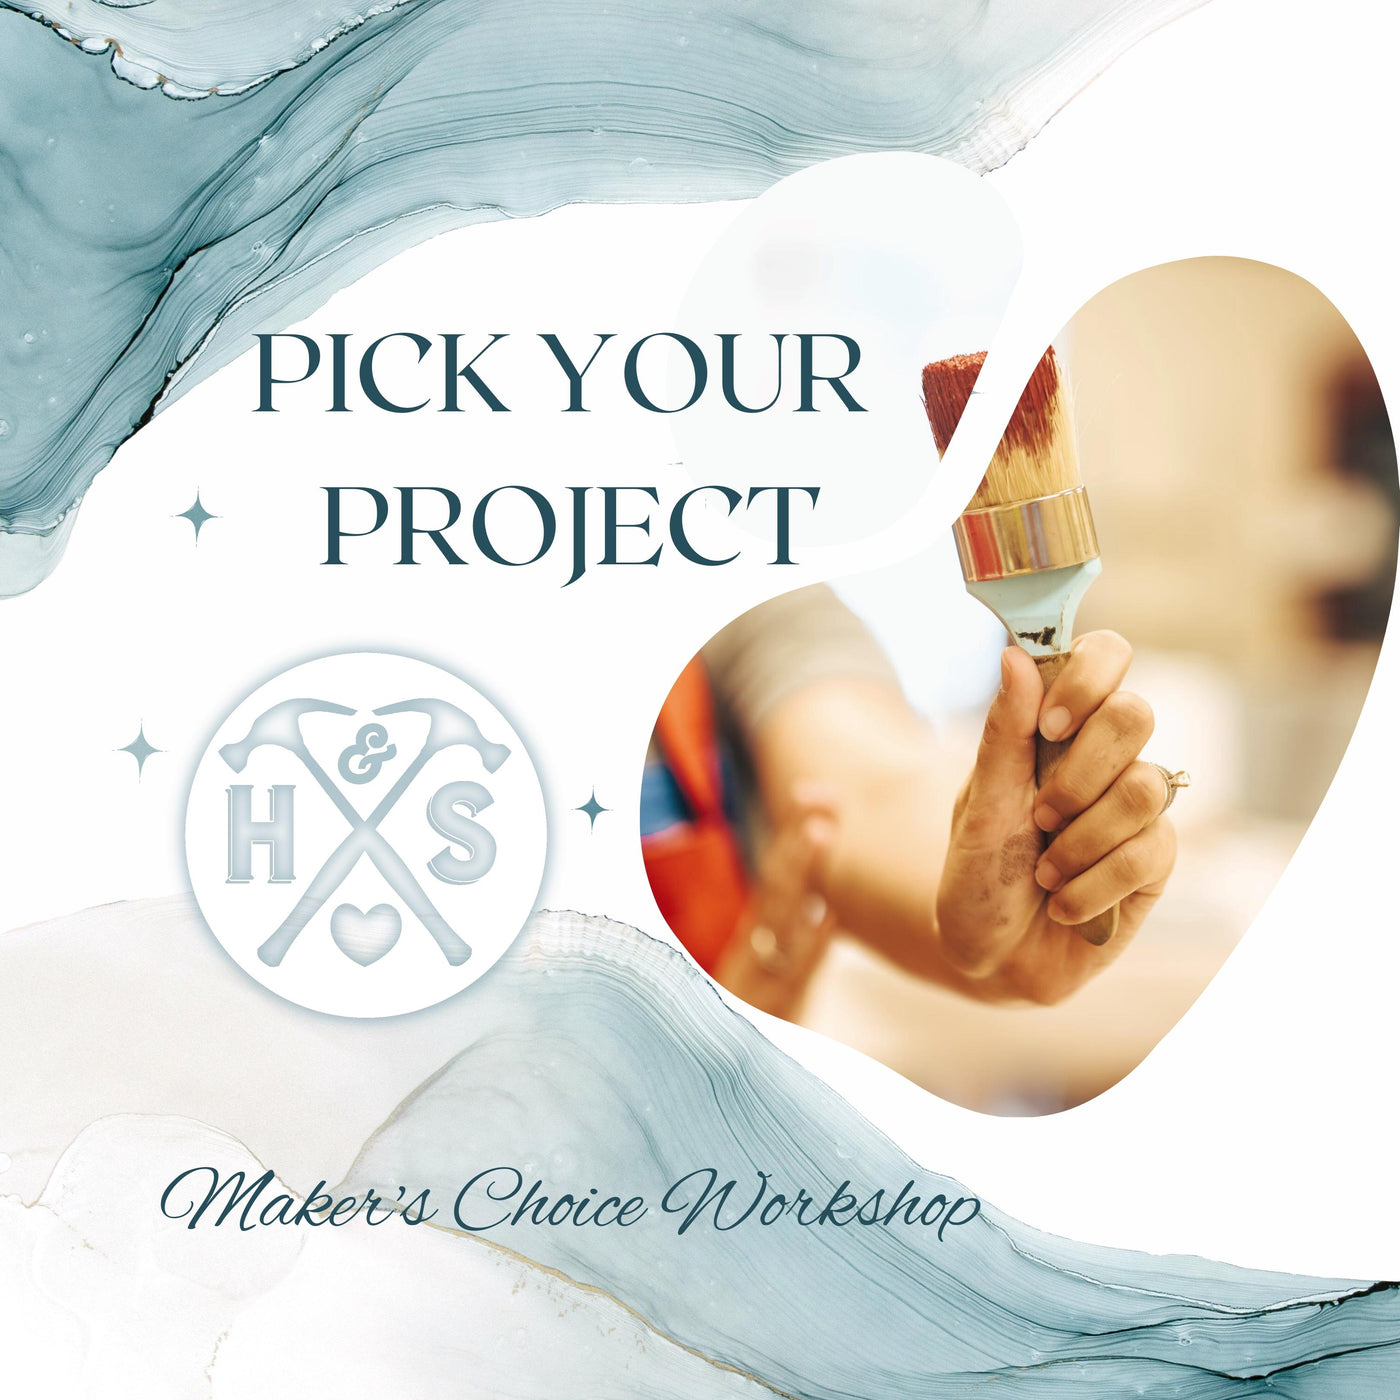 SUMMER PICK YOUR PROJECT WORKSHOP - JULY 29TH, 6:00 PM